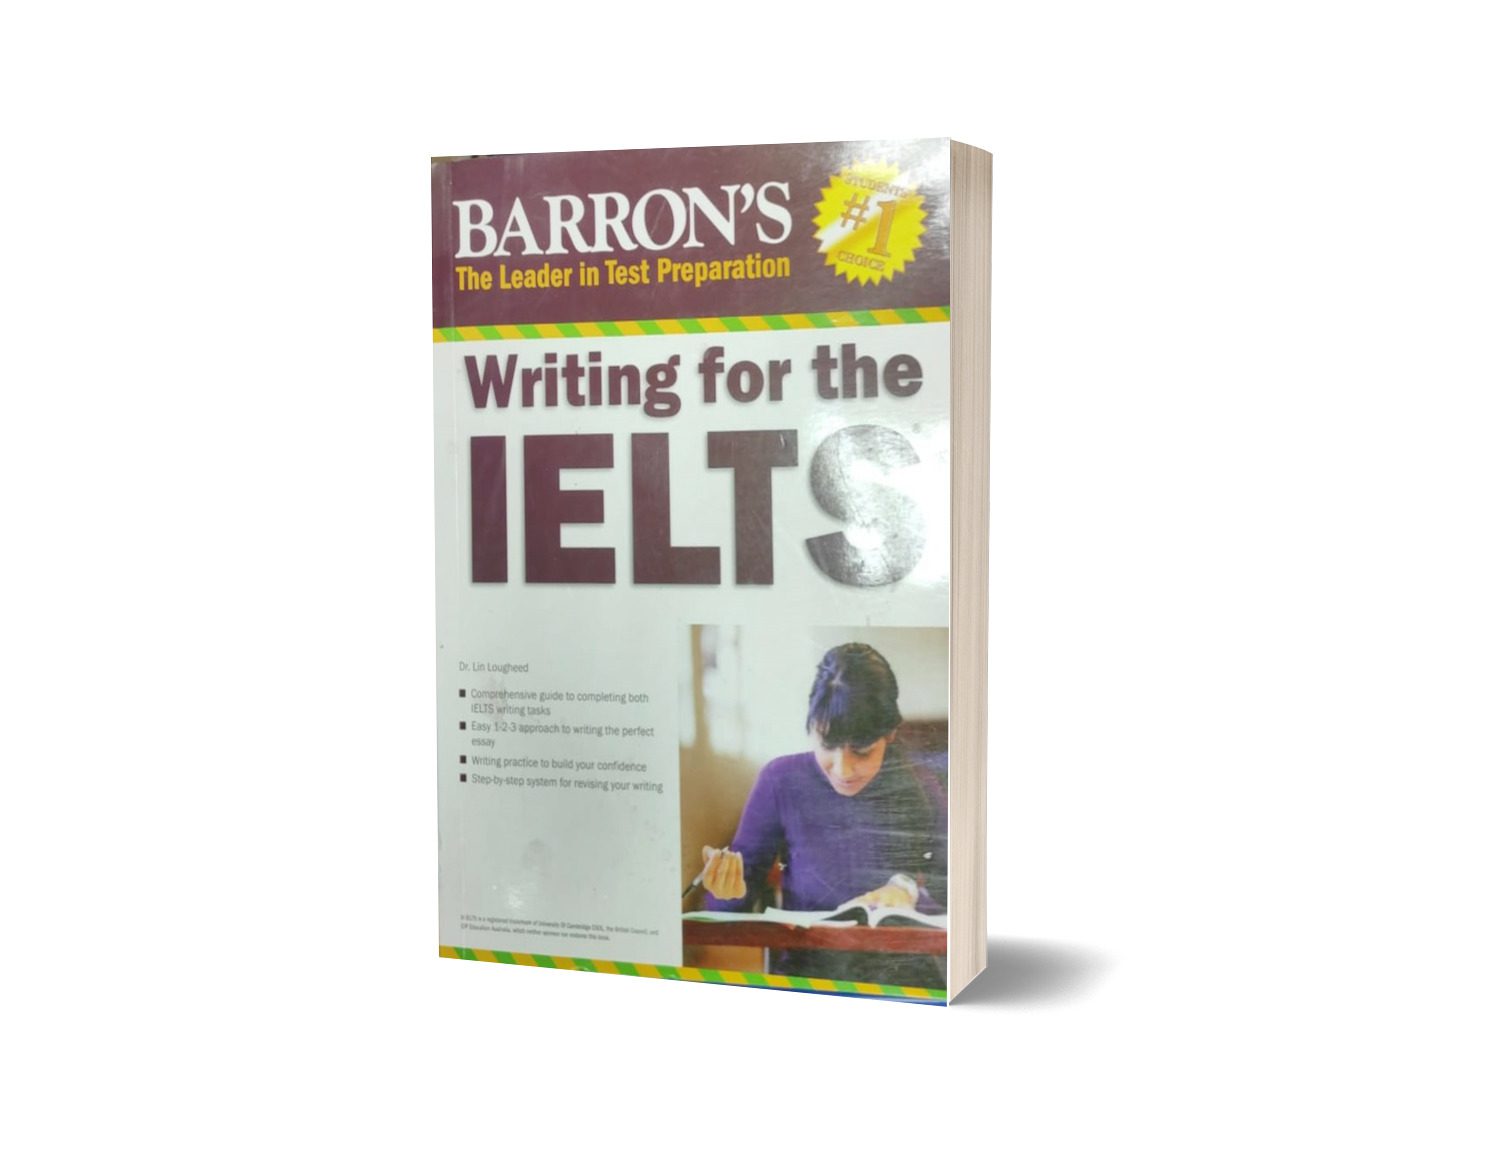 “BARRON'S IELTS PRACTICE EXAMS” (Writing Section) By Dr. Lin Lougheed